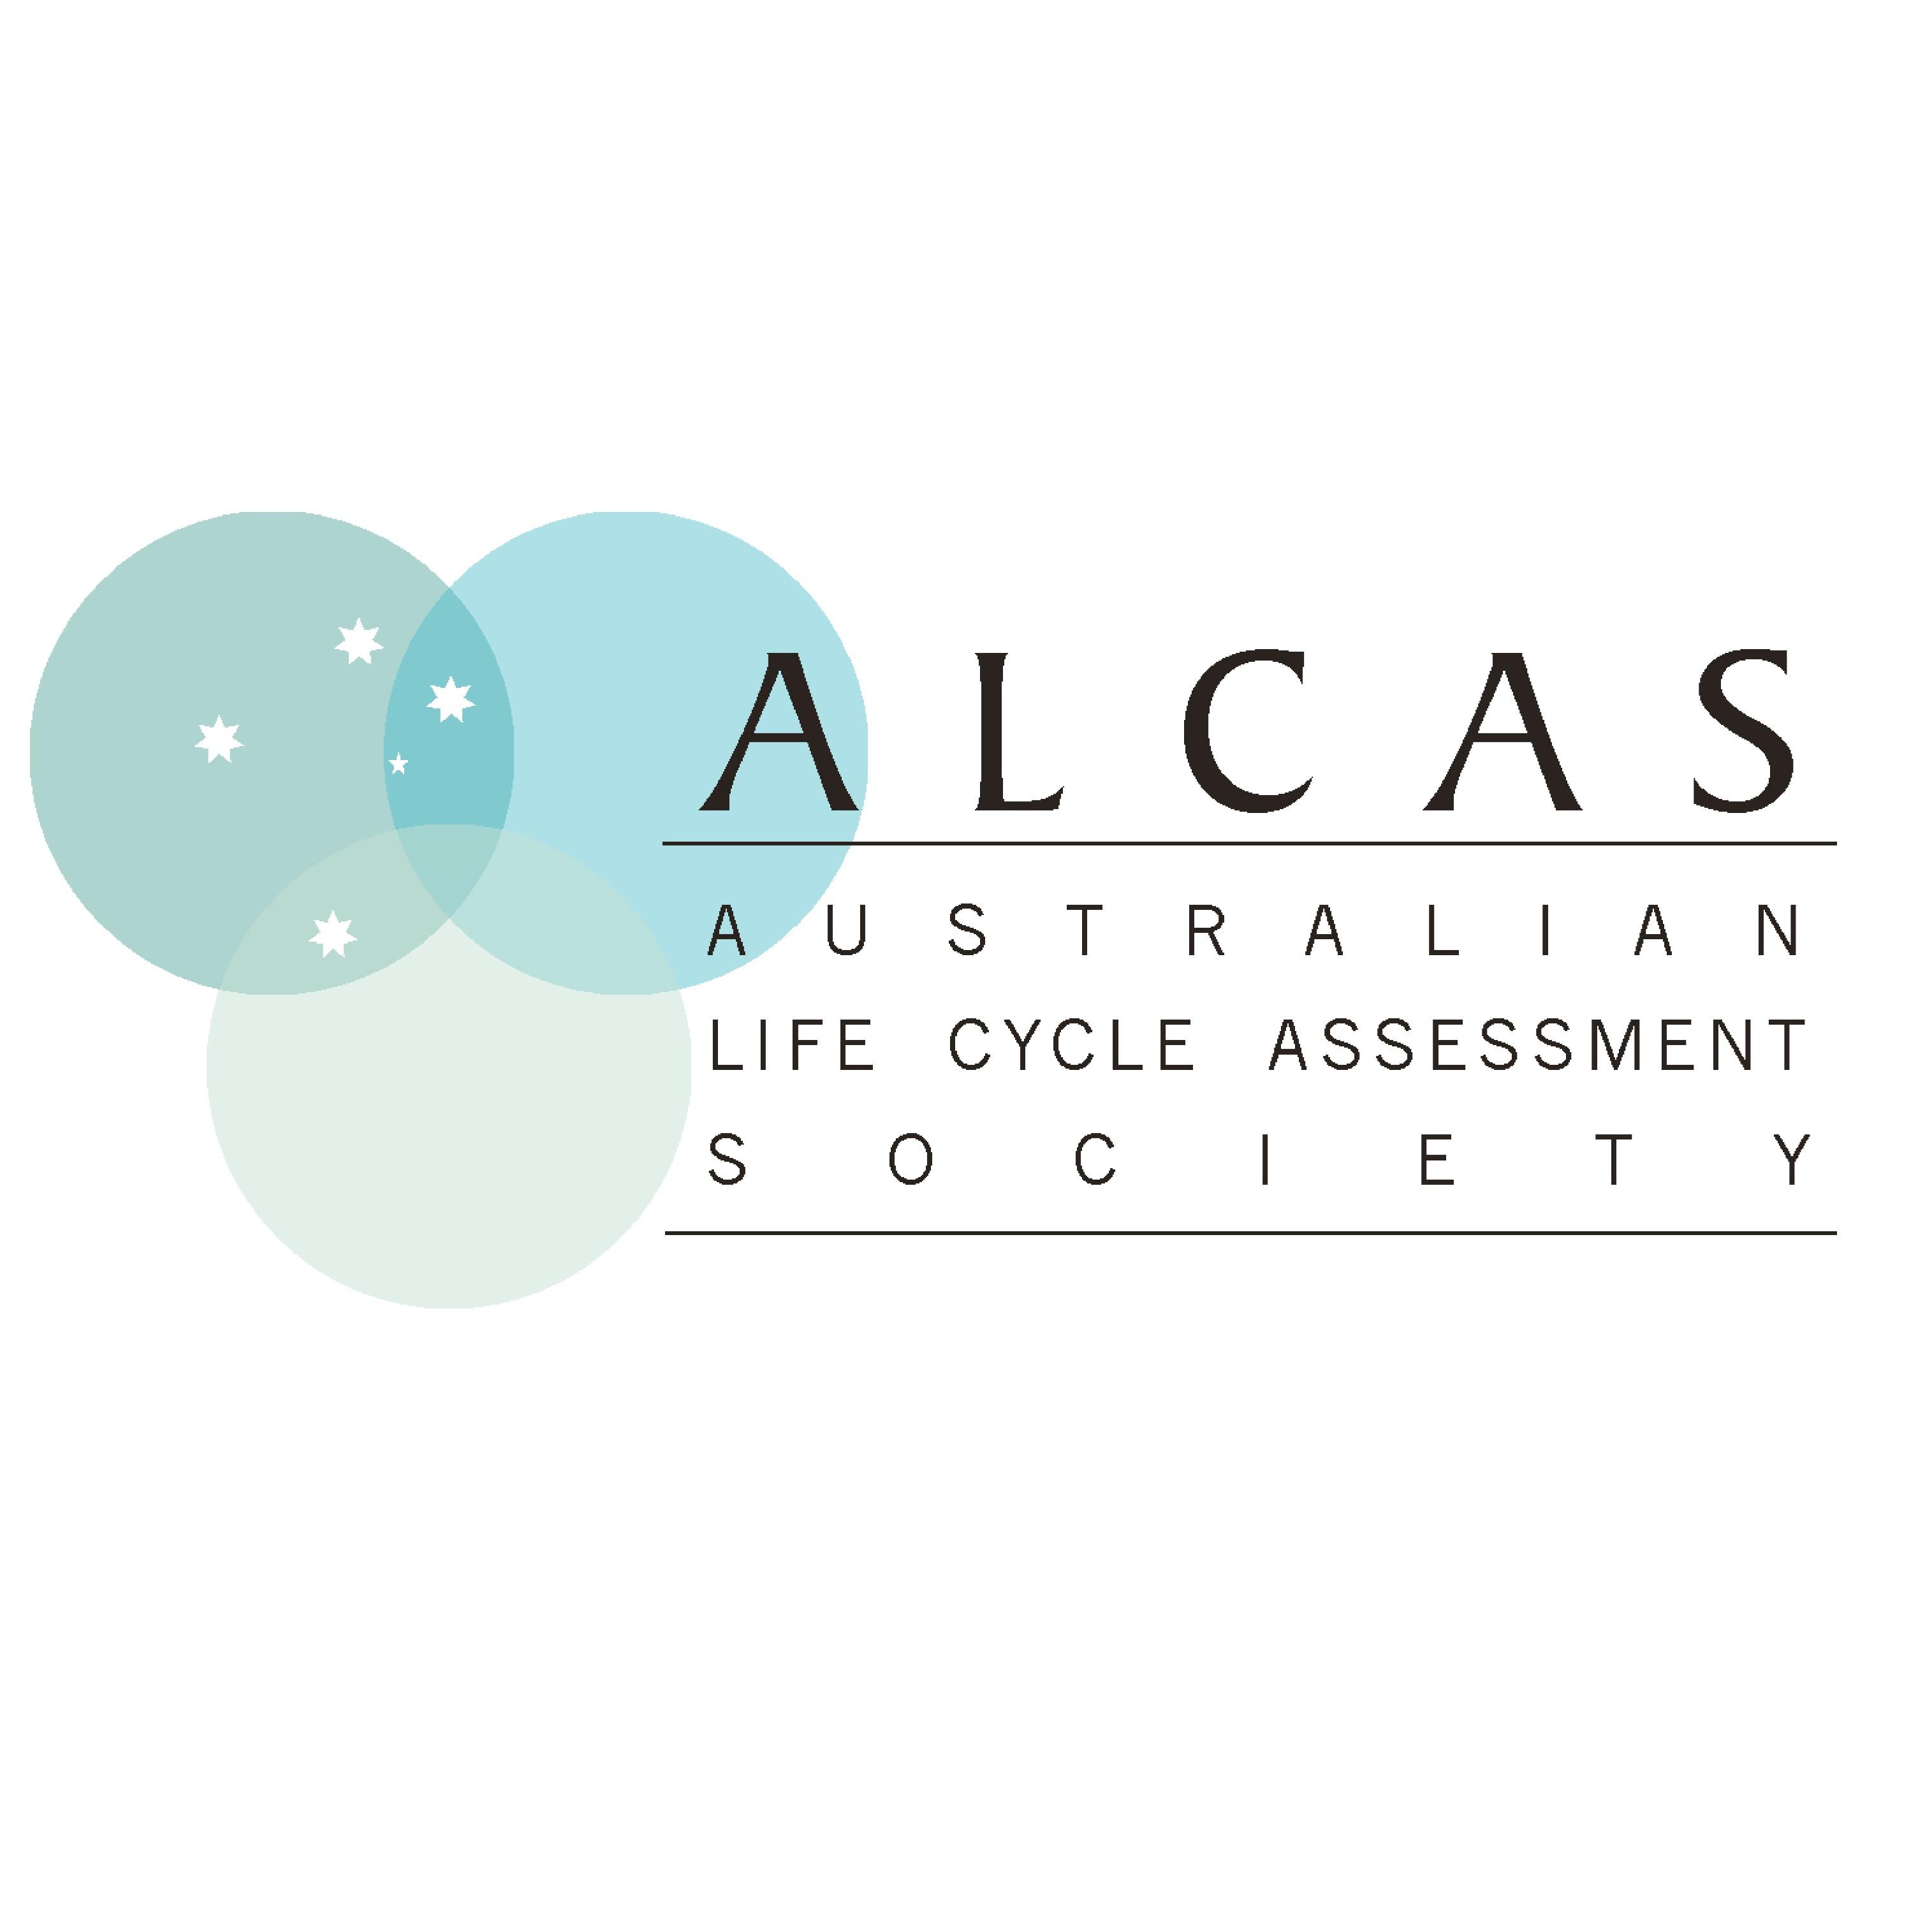 Australian Life Cycle Assessment Society is the national key body of LCA professionals providing strategic tools and learning for growth in sustainability